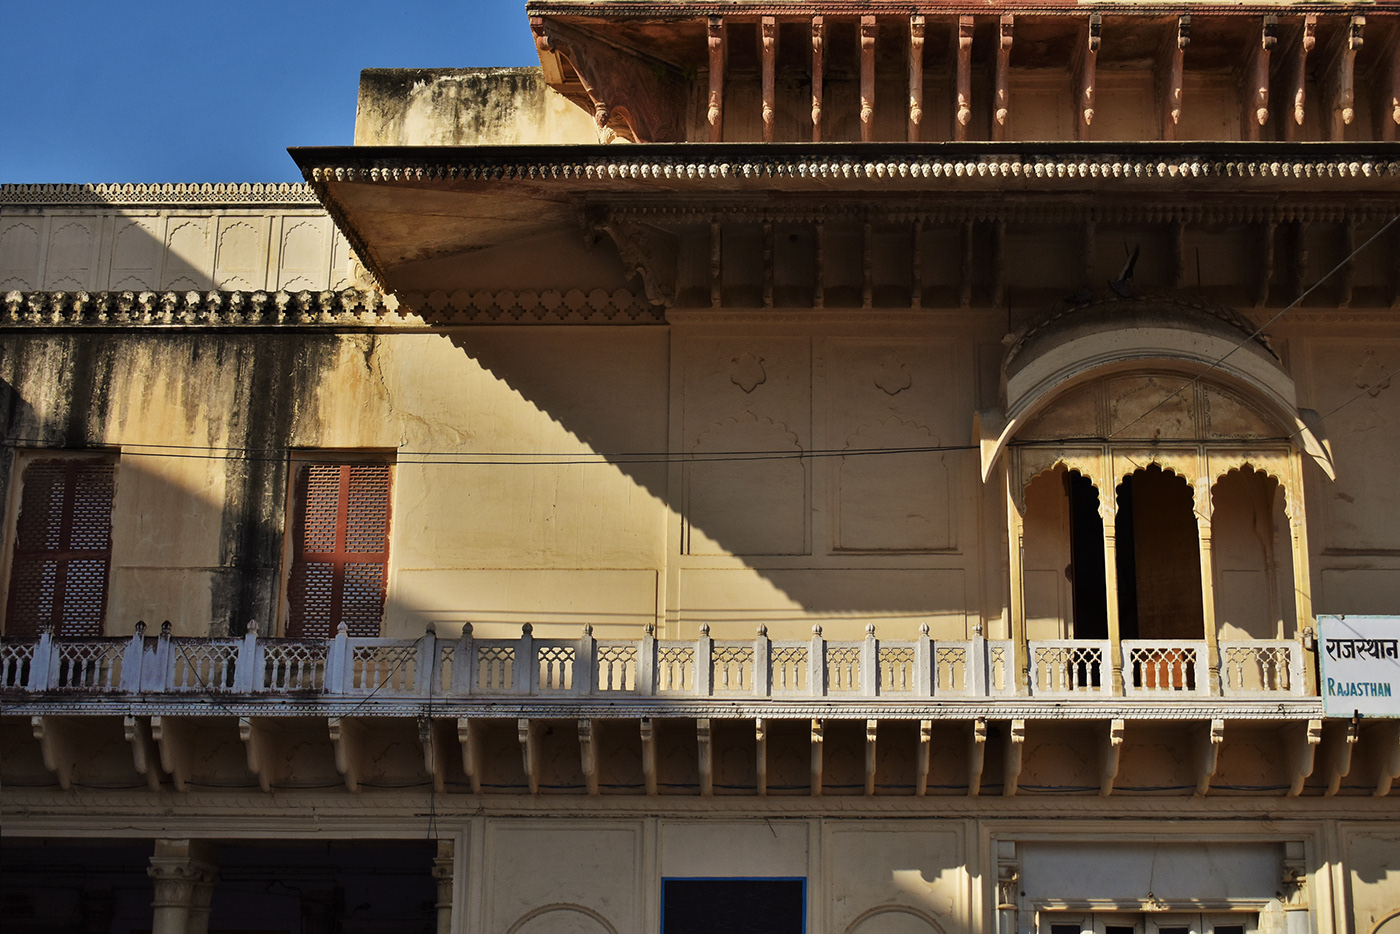 #architecture #art #Design #digitalphotography #heritage  #incredible india #India #modern   #photography #Rajasthan